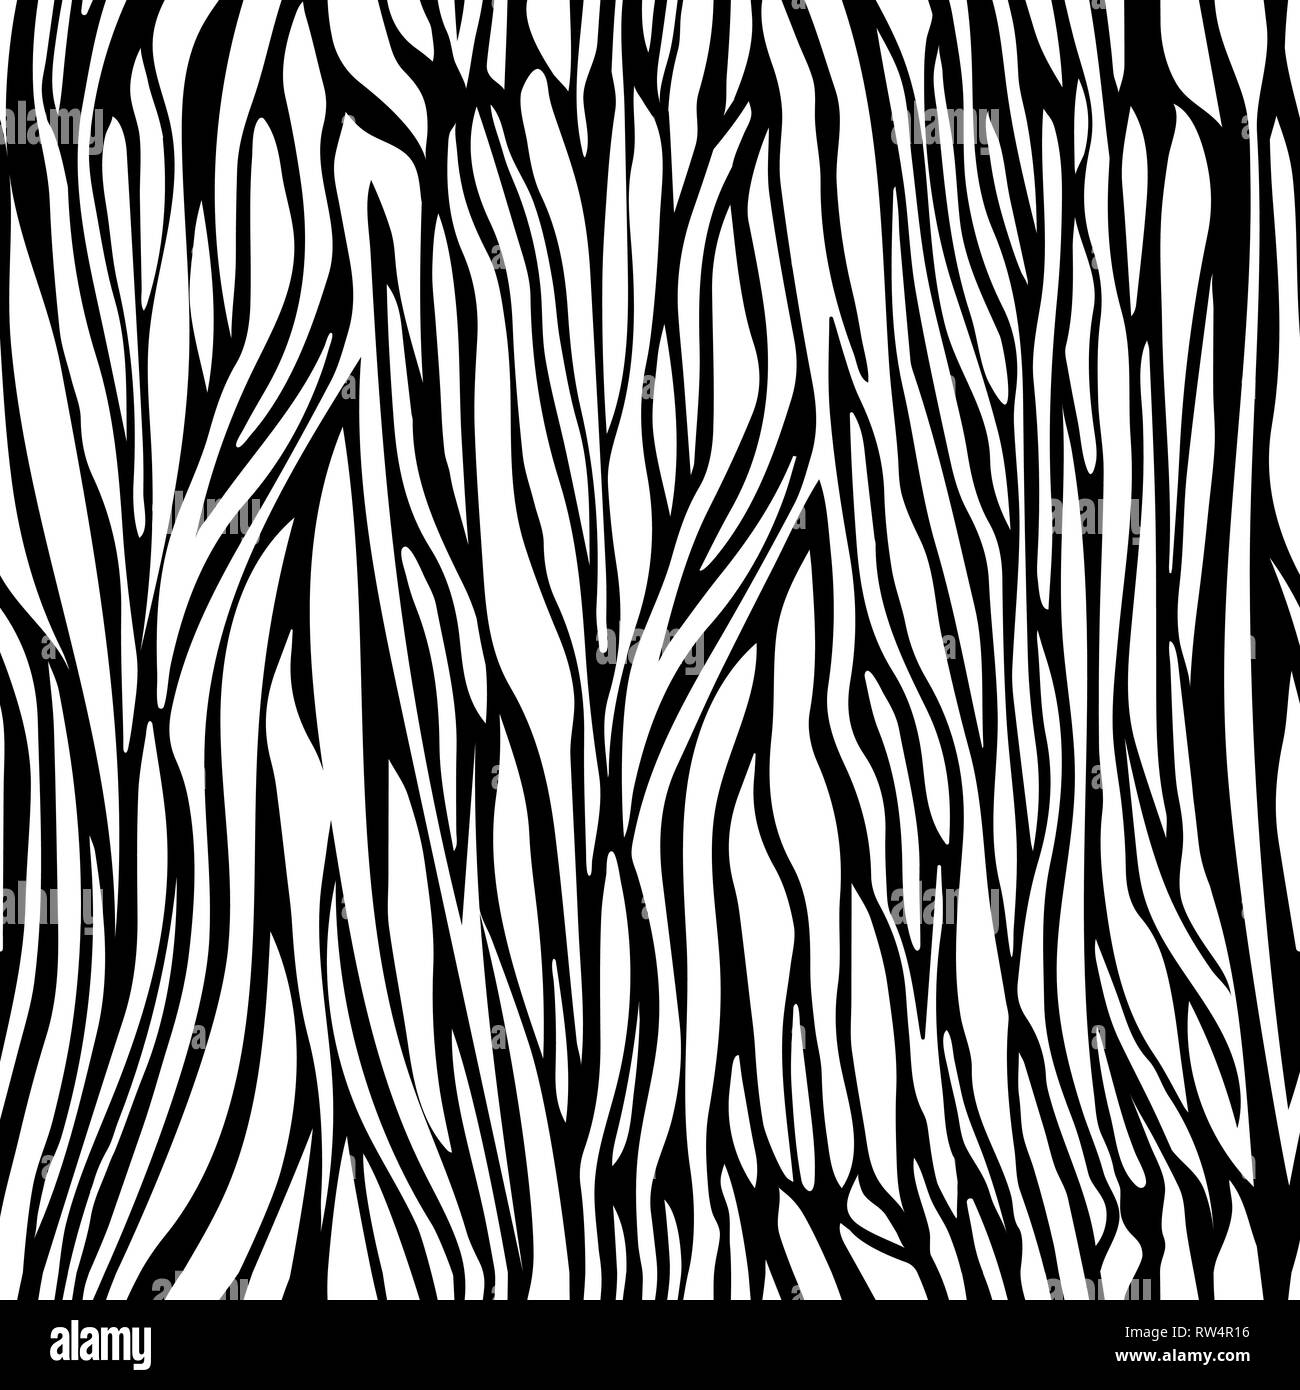 Zebra skin seamless pattern, animal texture, animalistic ornament, monochrome abstract tracery, vector background. Chaotic black stripes on white back Stock Vector